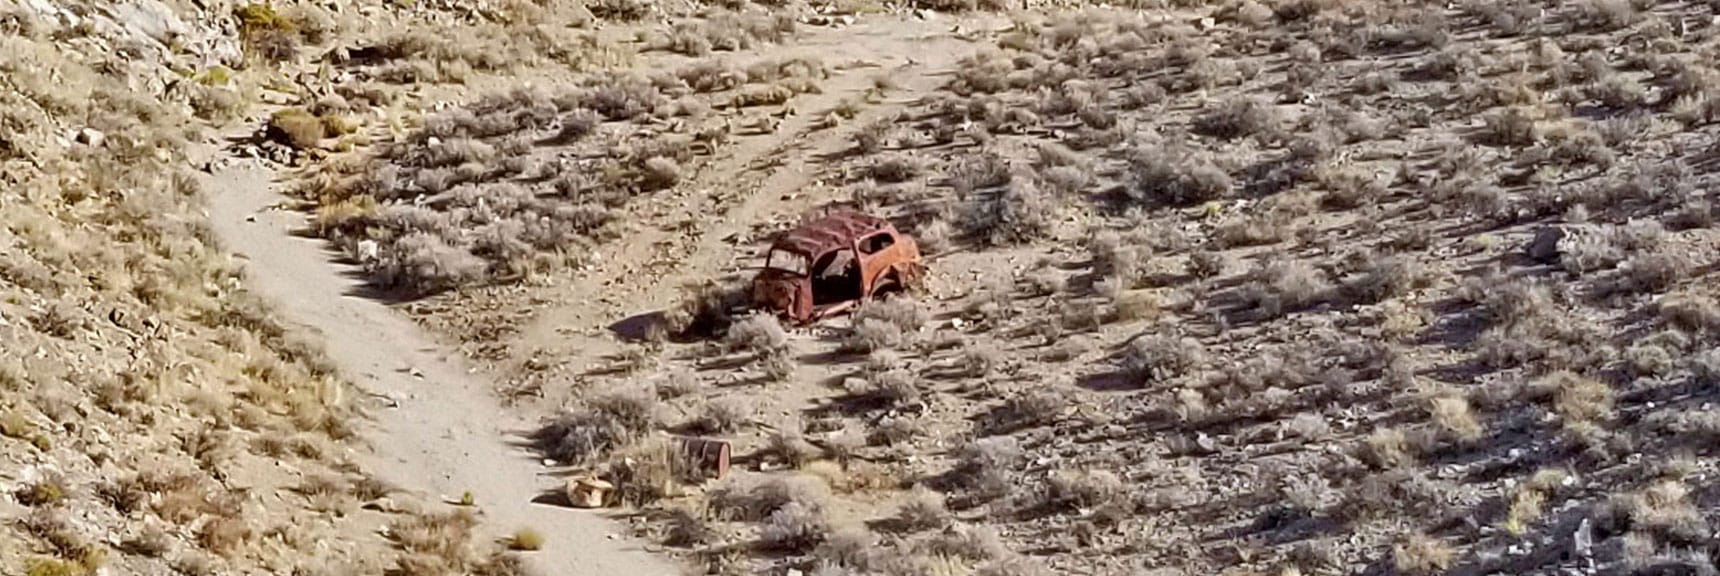 Old Rusty Auto Left Behind | Skidoo Stamp Mill, Panamint Mountains, Death Valley National Park, CA